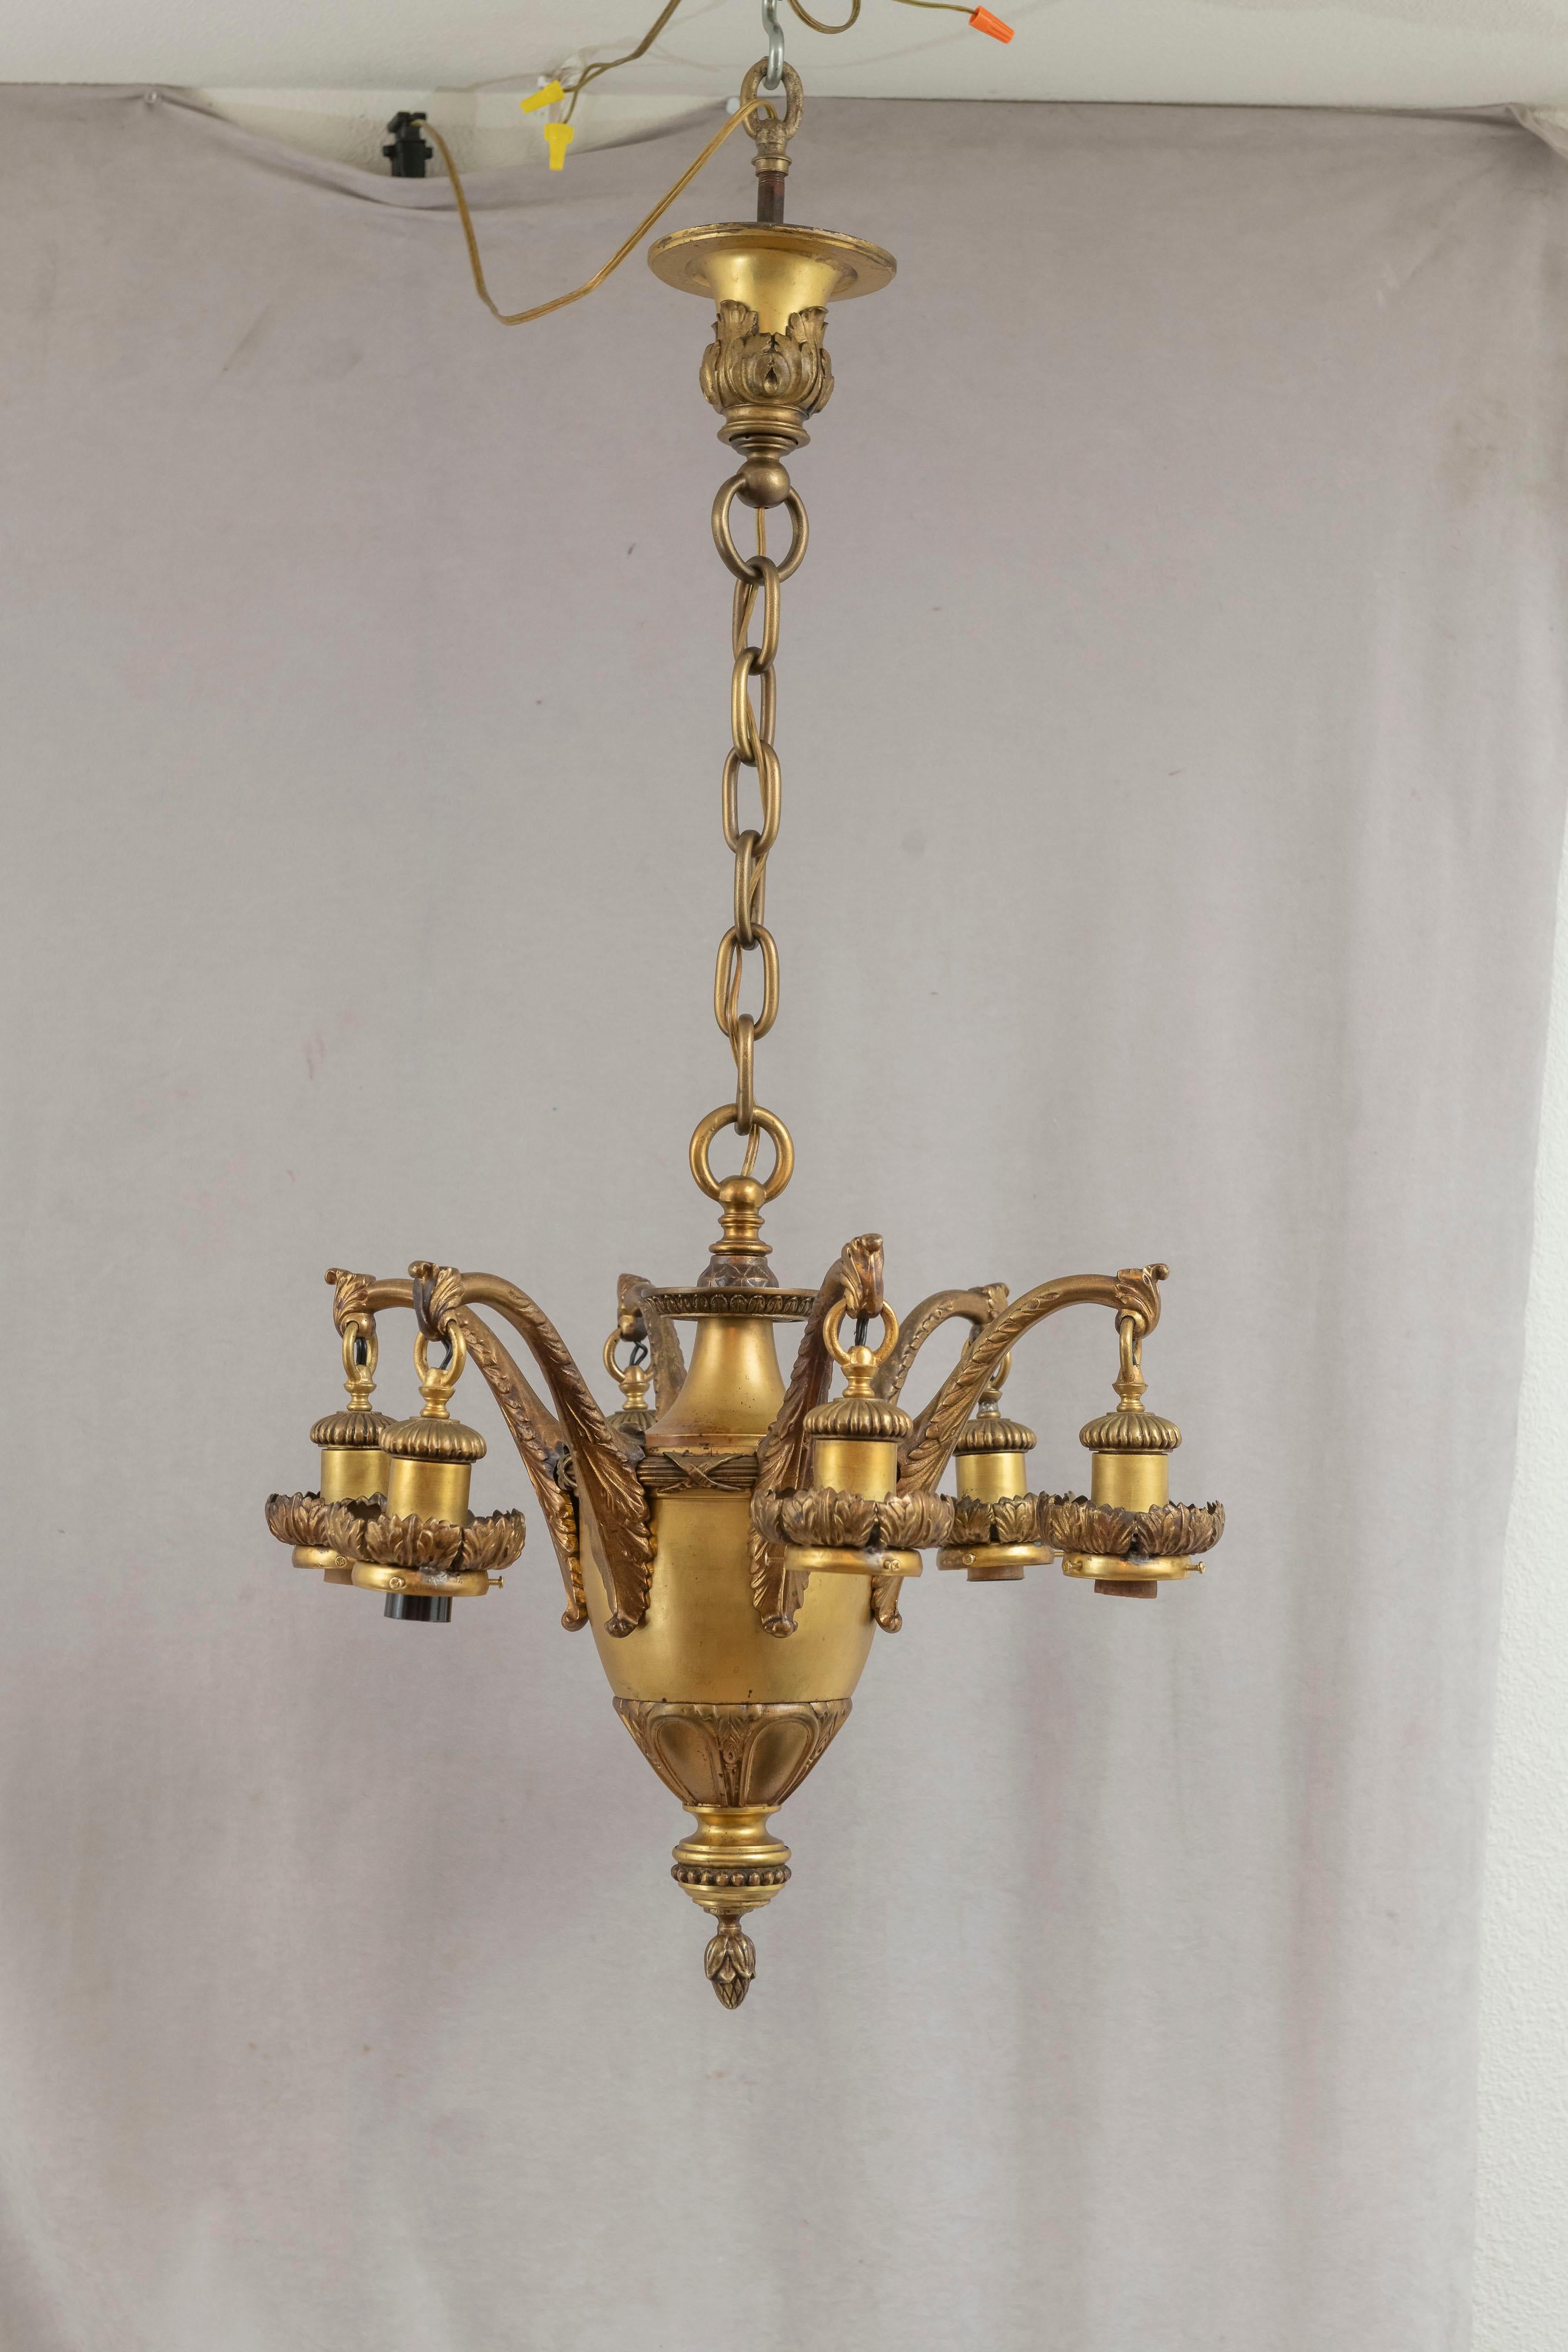 6 Arm Edwardian Chandelier w/ Hand Blown Shades all Signed by Quezal ca. 1910 10